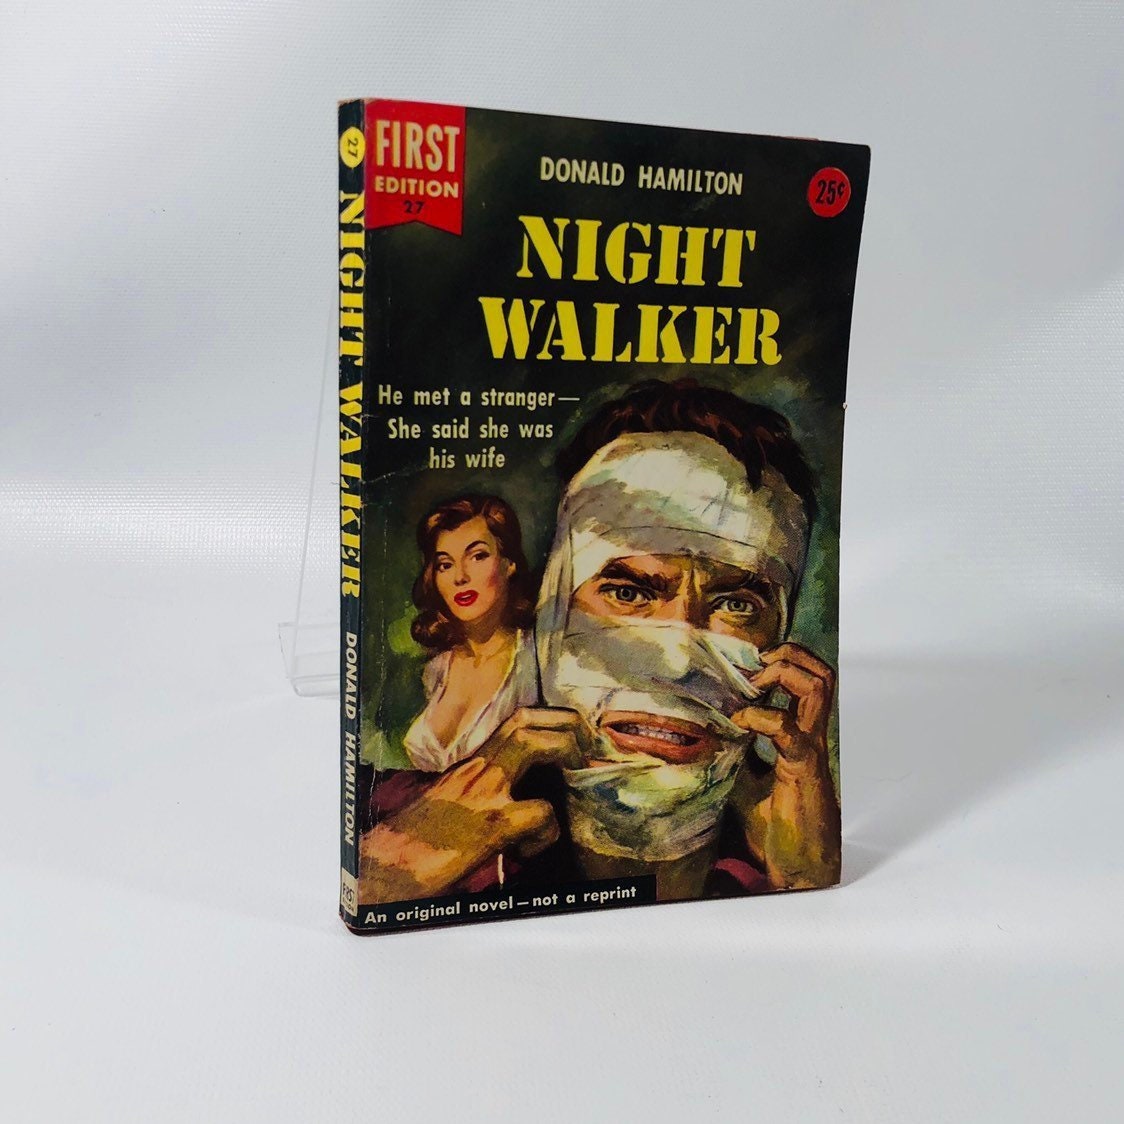 Vintage Paperback Night Walker by Donald Hamilton 1954 First Edition Cover Painting by Carl Boberetz Dell Book Number 27